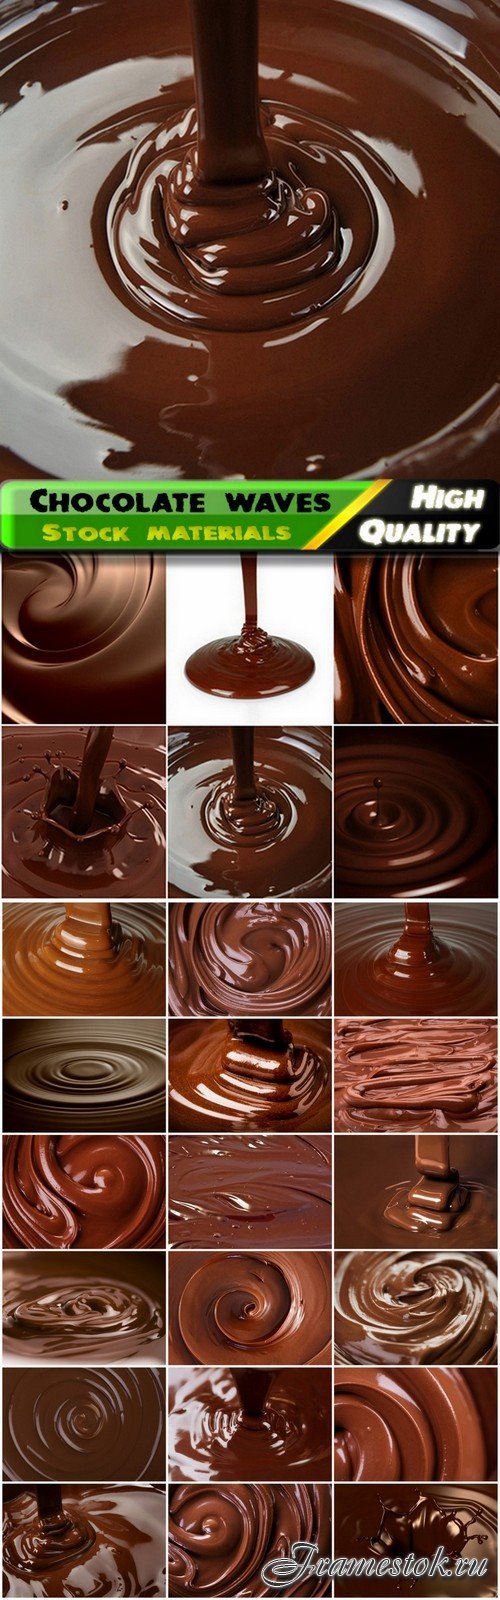 Chocolate backgrounds with waves and splatters - 25 HQ Jpg